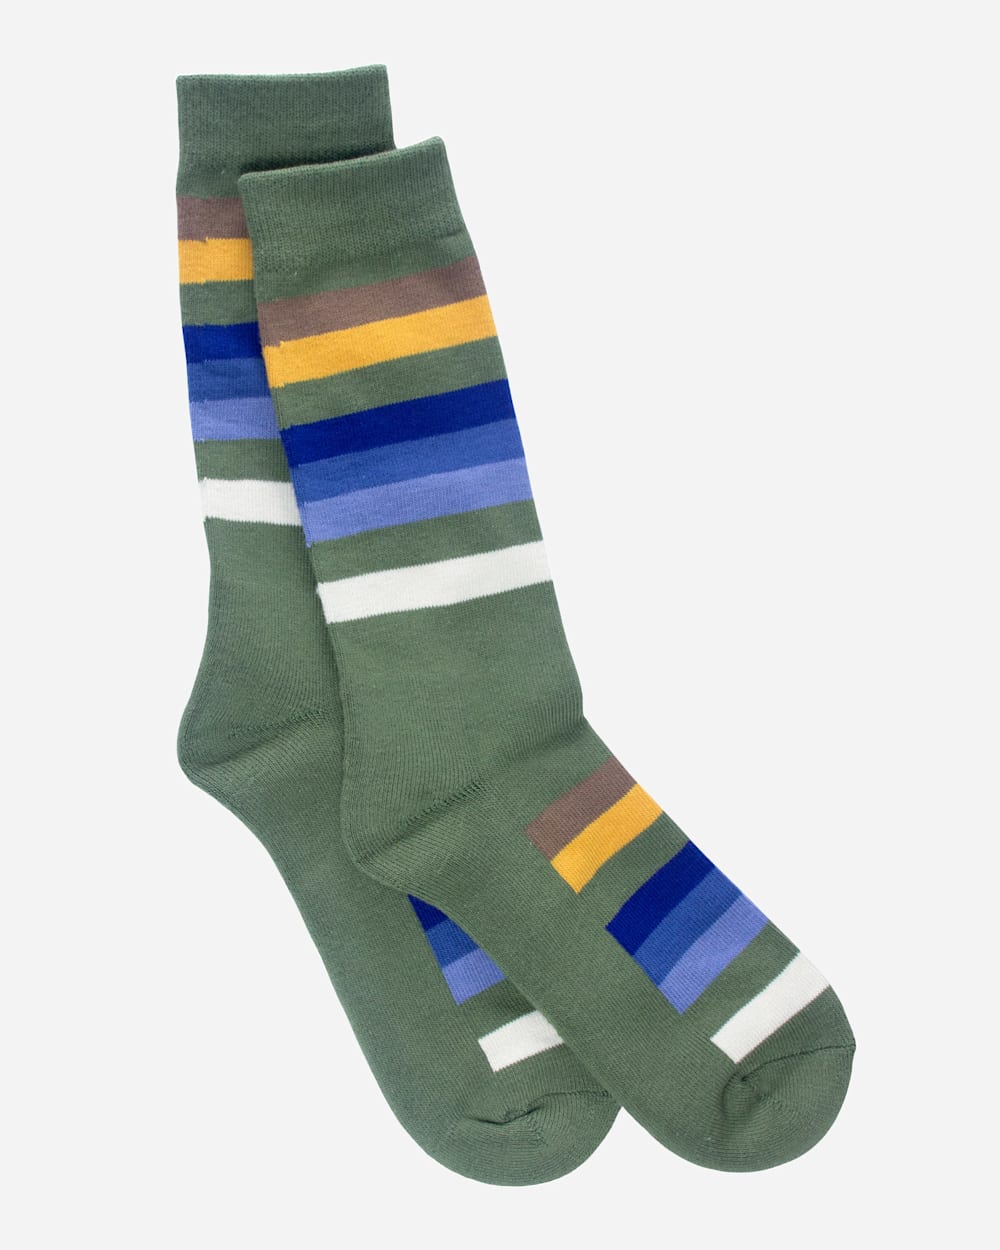 NATIONAL PARK STRIPE CREW SOCKS IN ROCKY MOUNTAIN image number 1